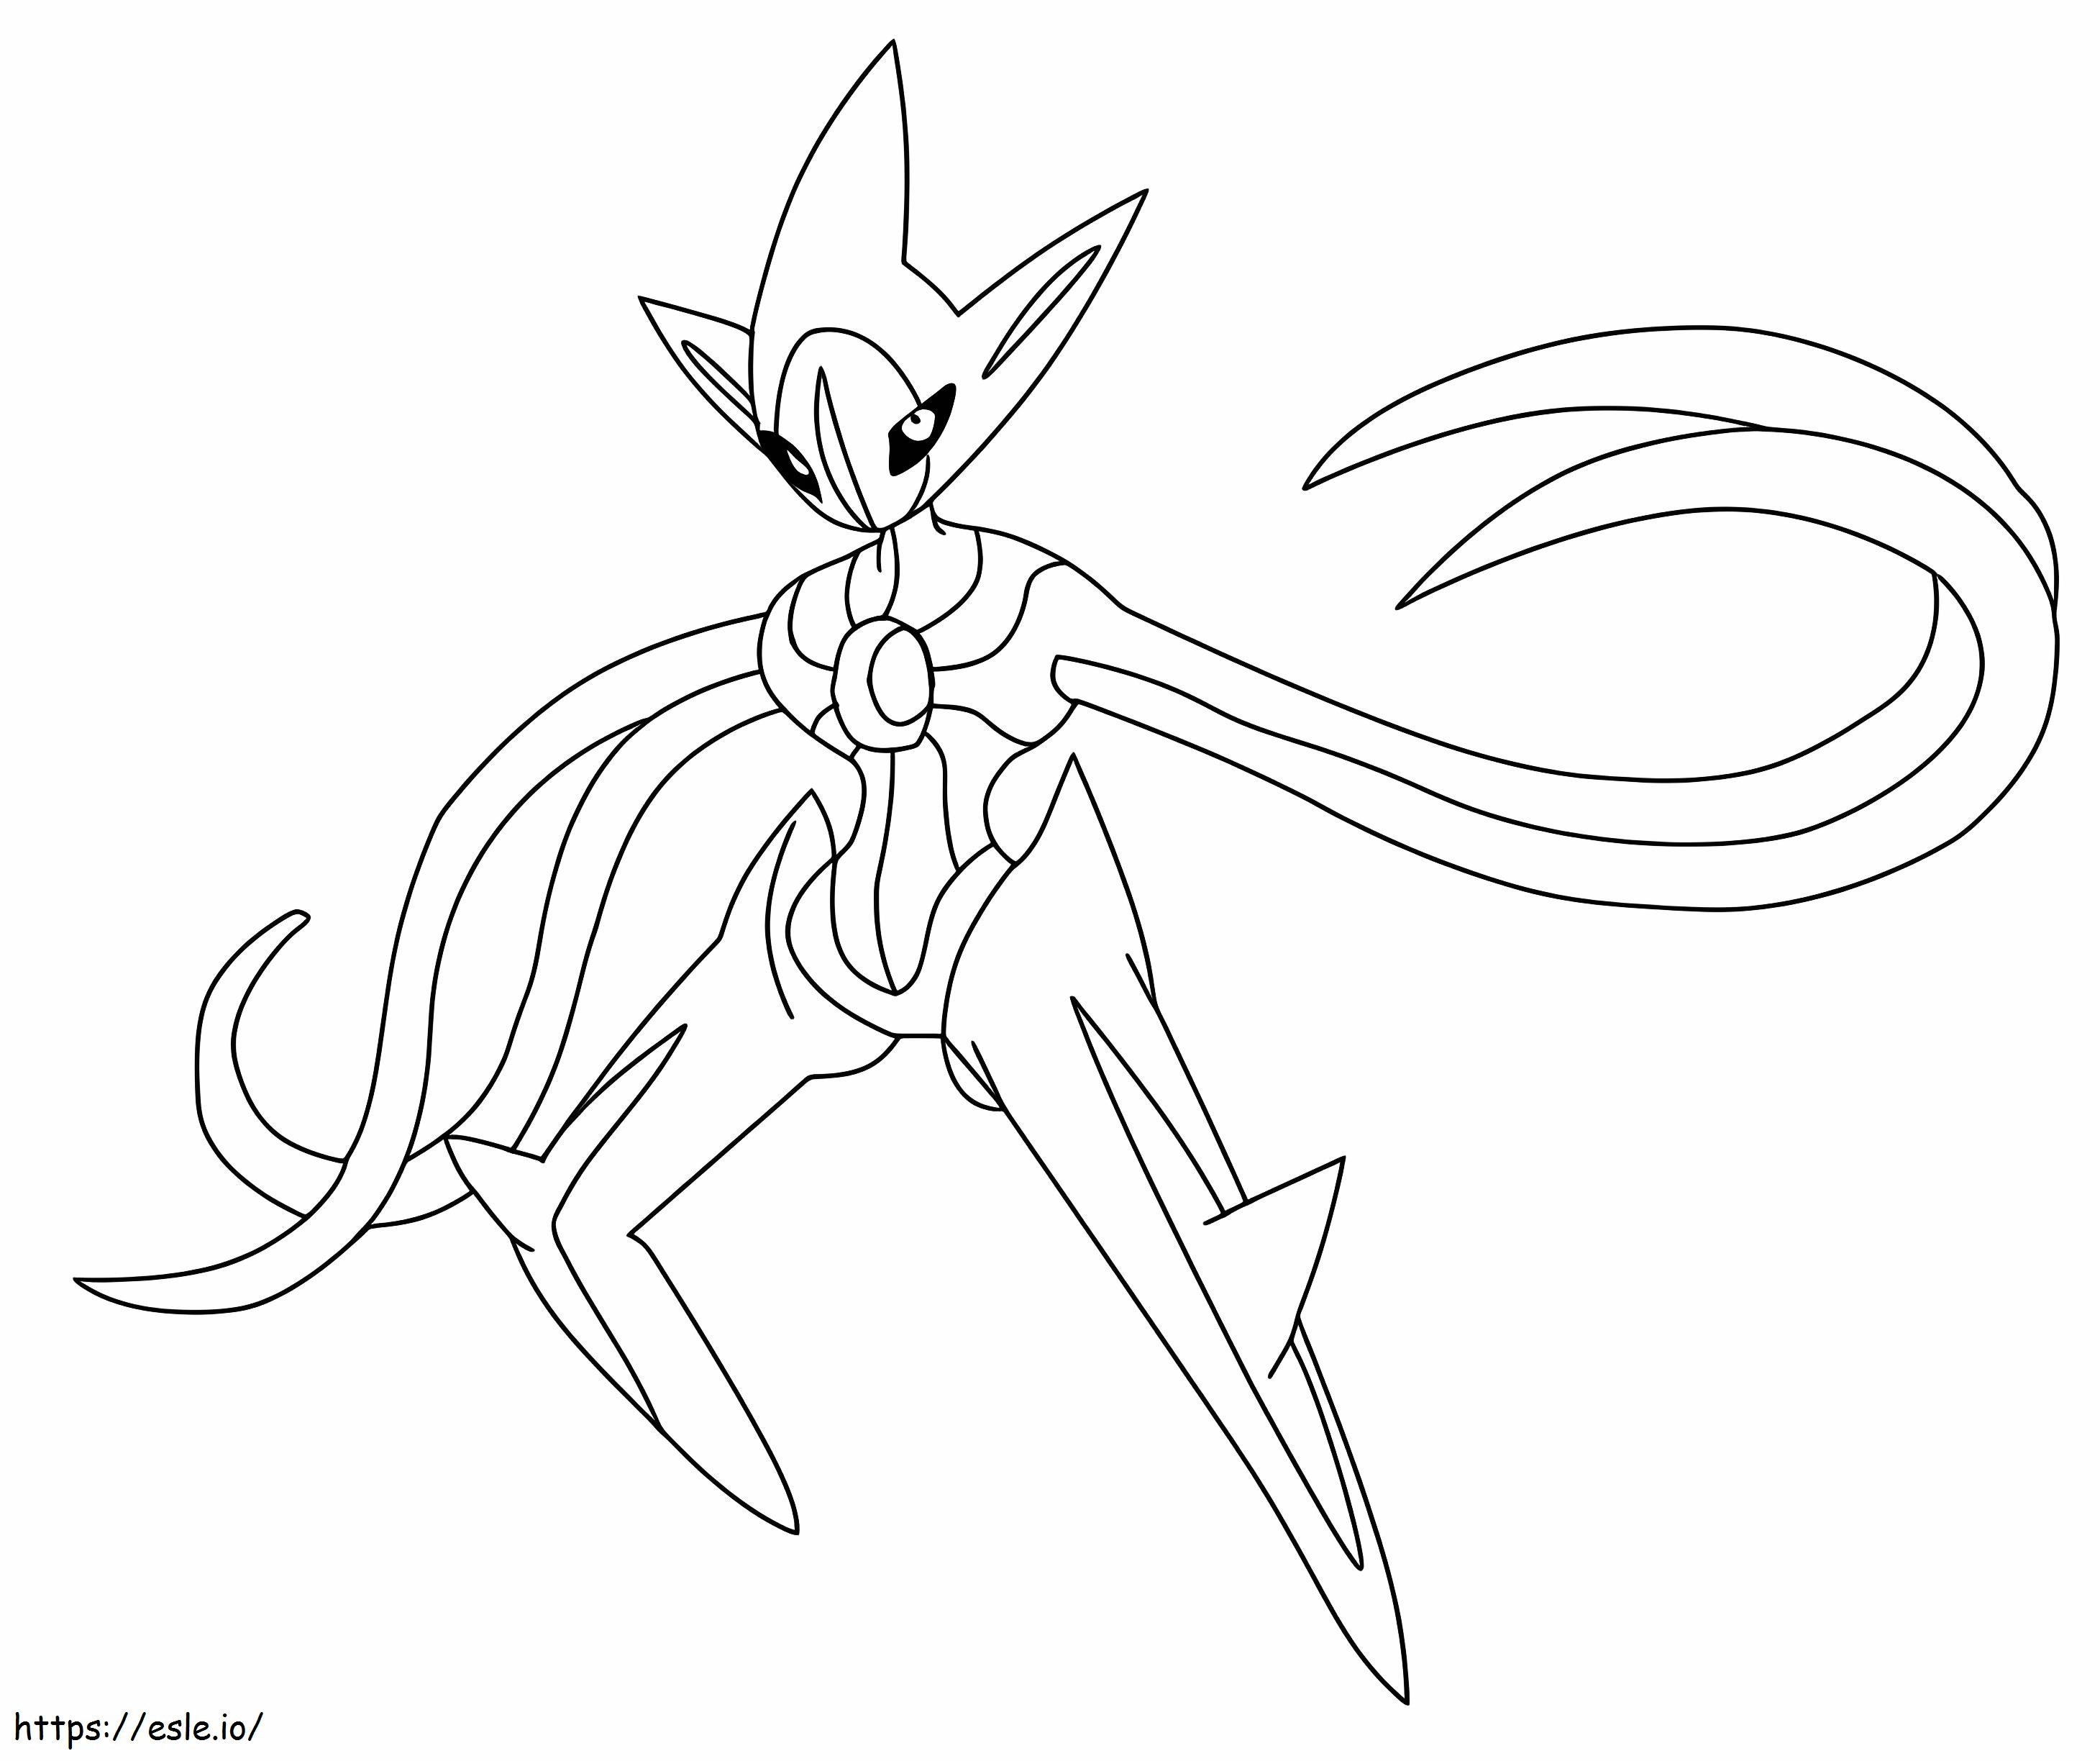 Deoxys In Attack Form coloring page